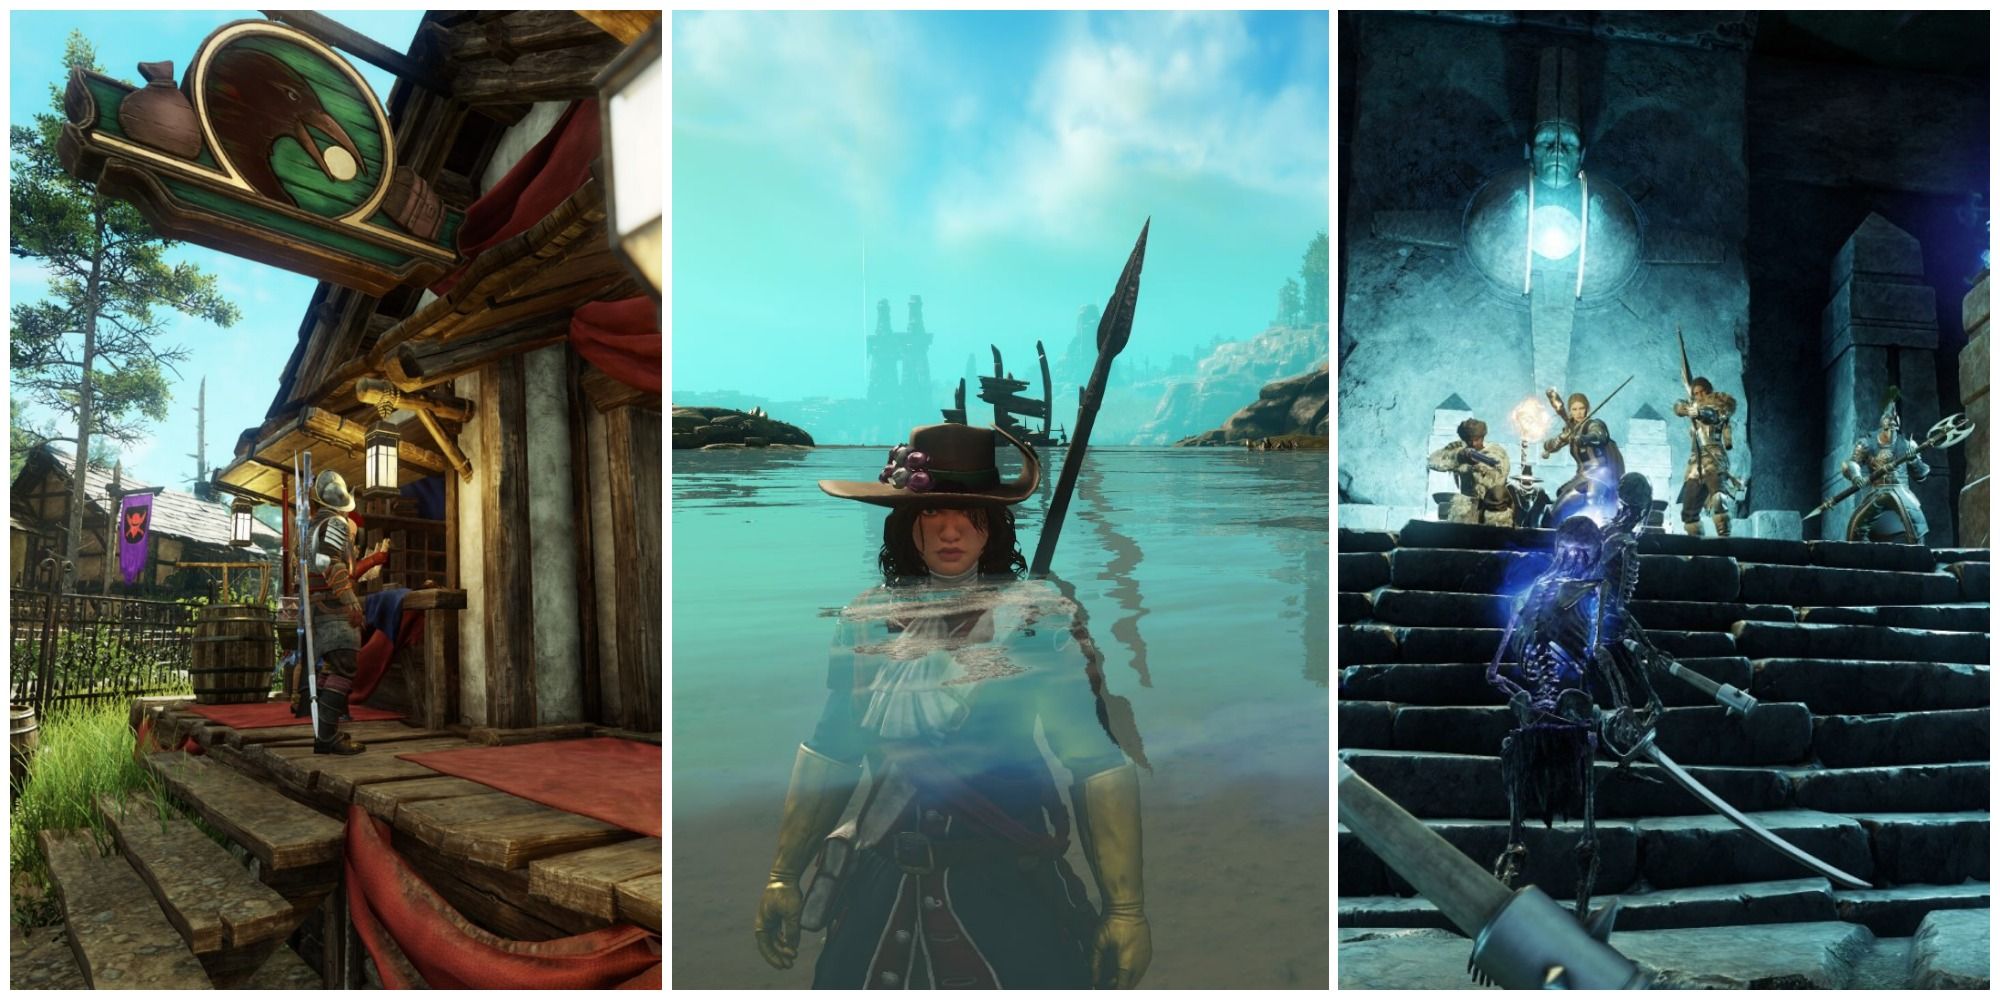 Split image of Trading Post, a player standing neck-deep in water, and skeletons coming up stairs towards armed players, from left to right